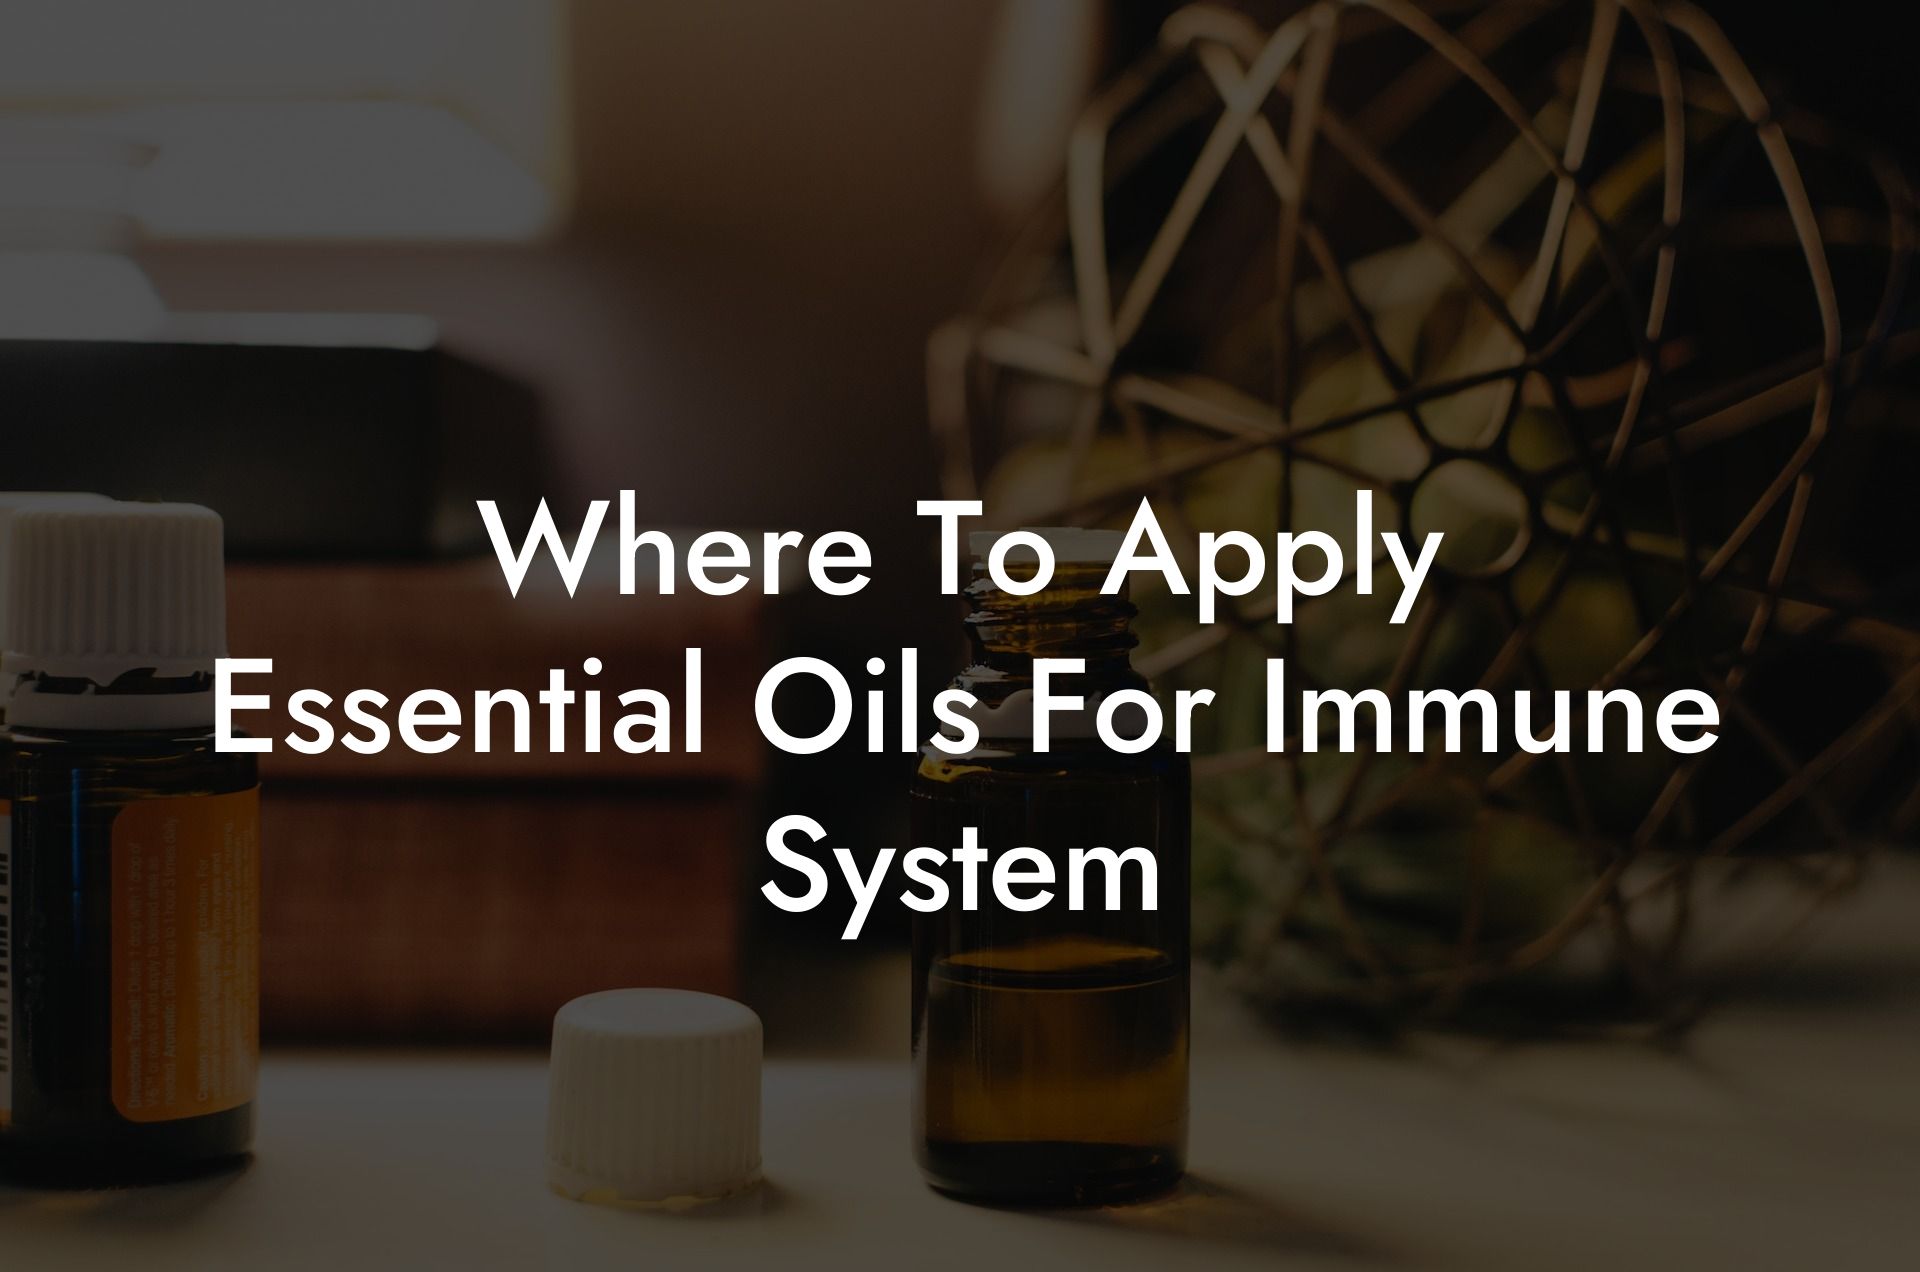 Where To Apply Essential Oils For Immune System